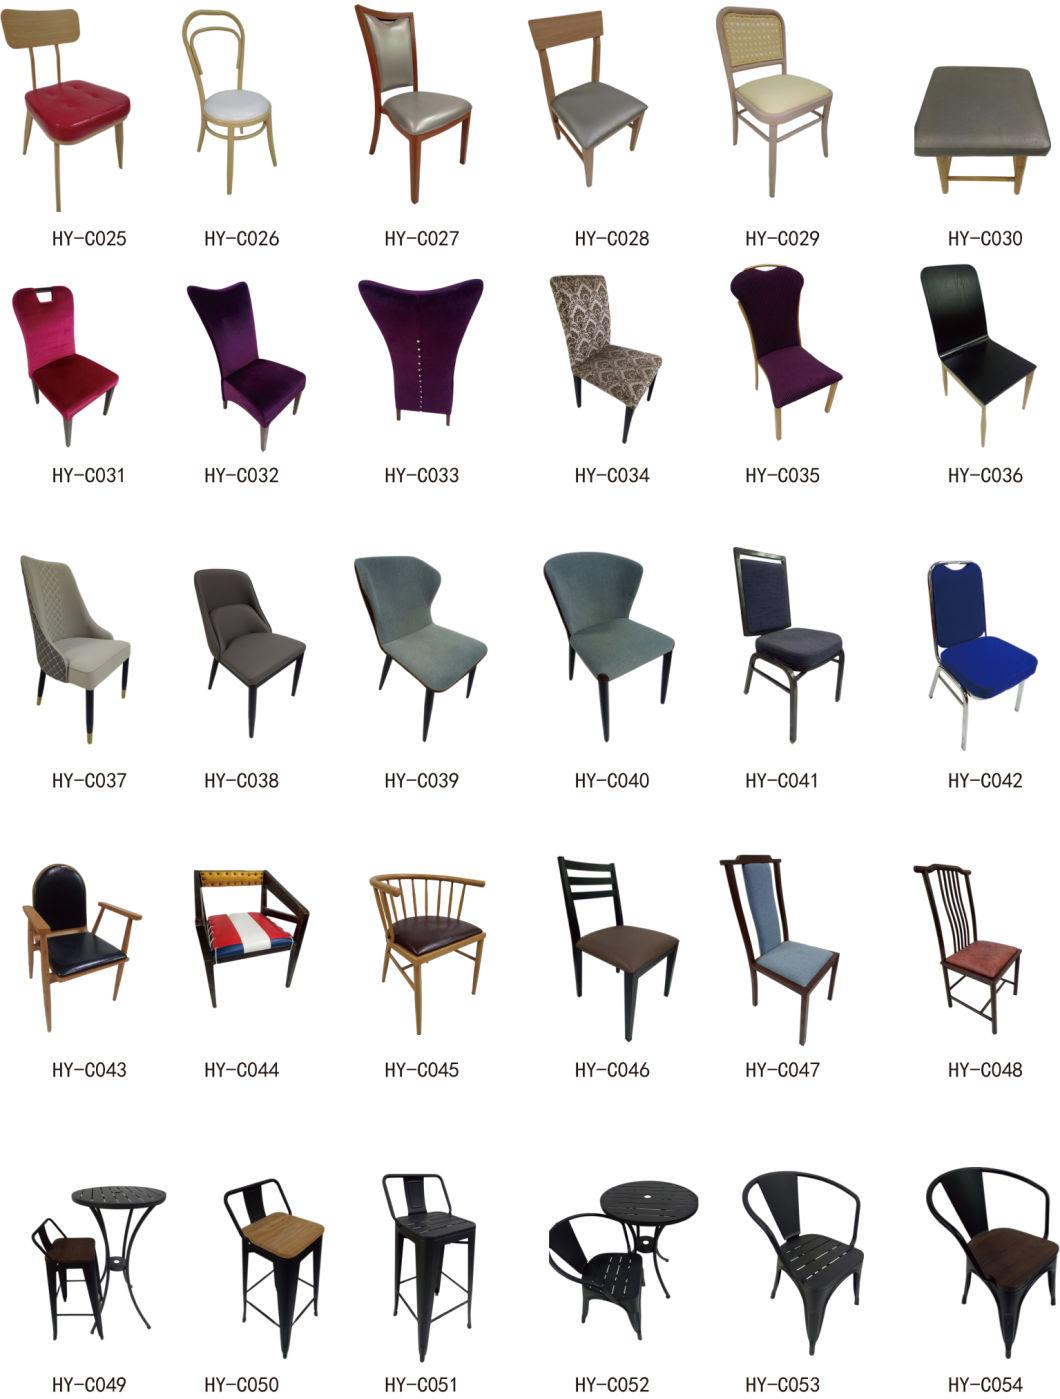 Modern Event Furniture Customized European Banquet Chair Living Room Chairs Stackable Metal Hotel Restaurant Wedding Chair Dining Table Chairs